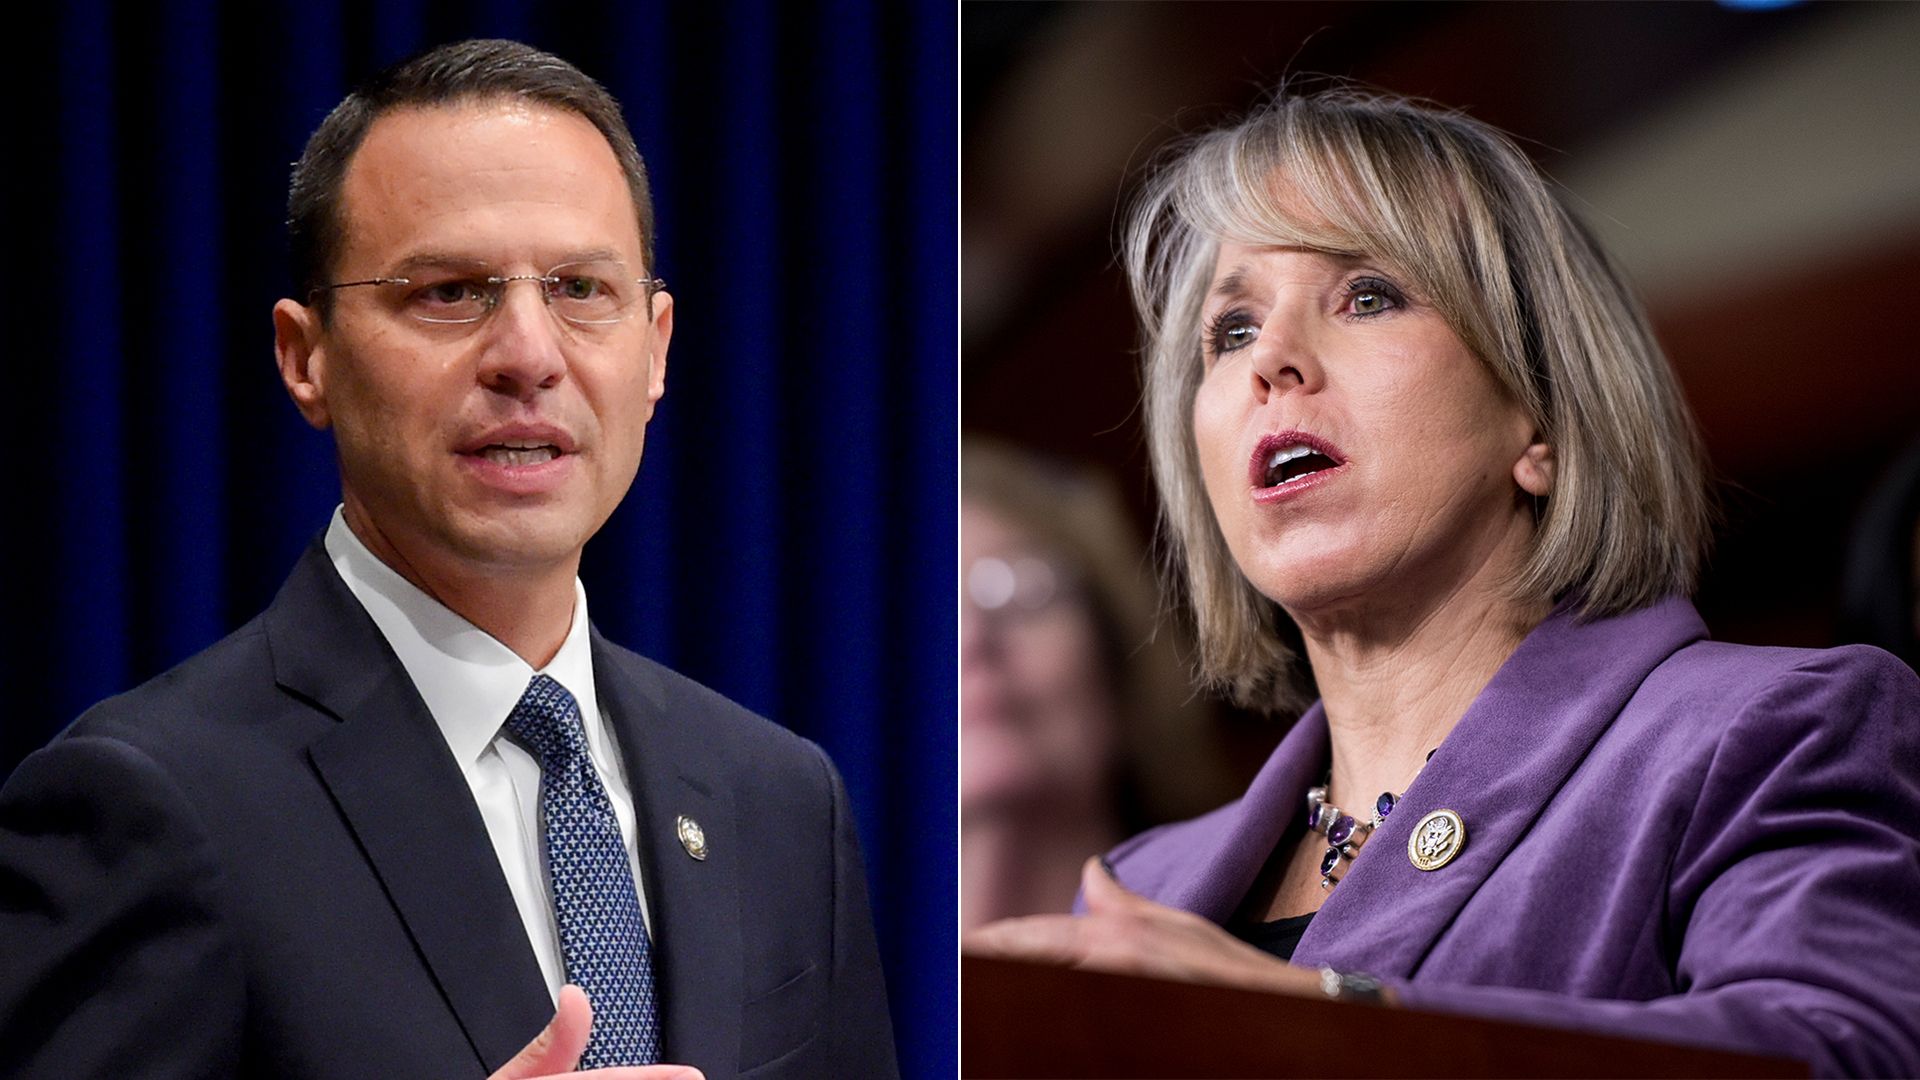 Pennsylvania Attorney General Joel Shapiro and New Mexico Governor Michelle Lujan Grisham are seen side by side.